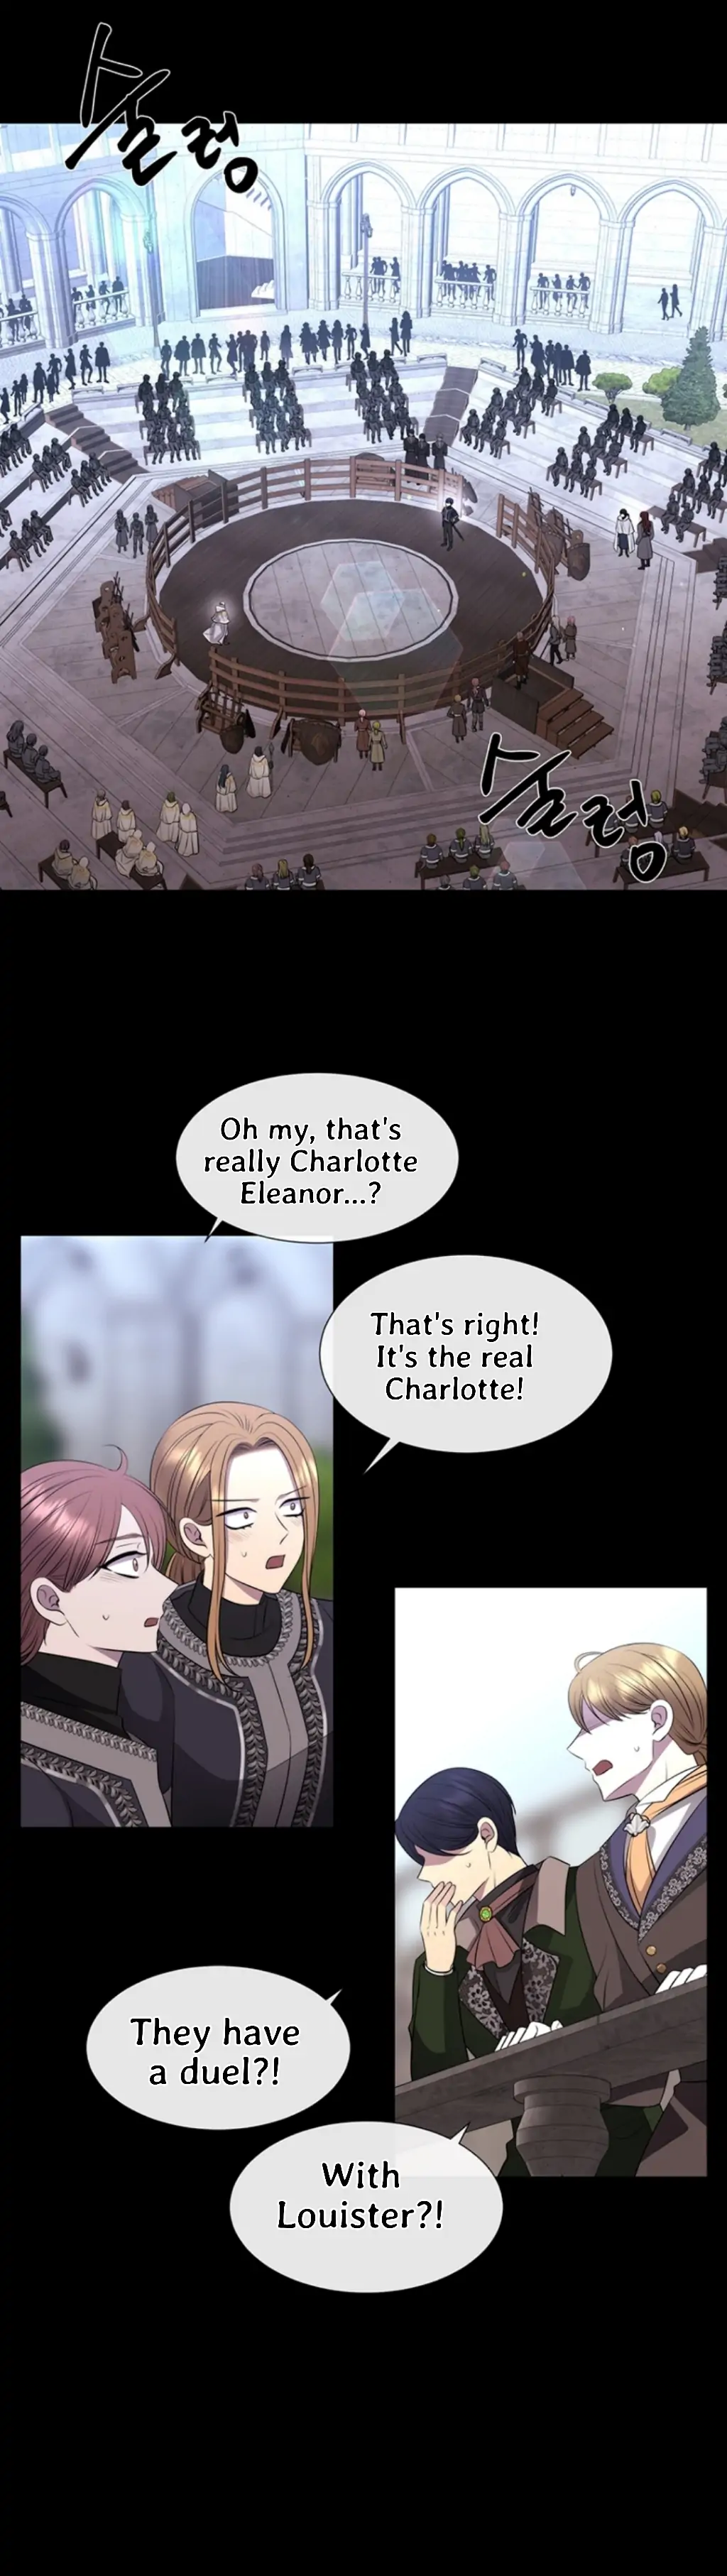 Charlotte Has Five Disciples chapter 132 page 10